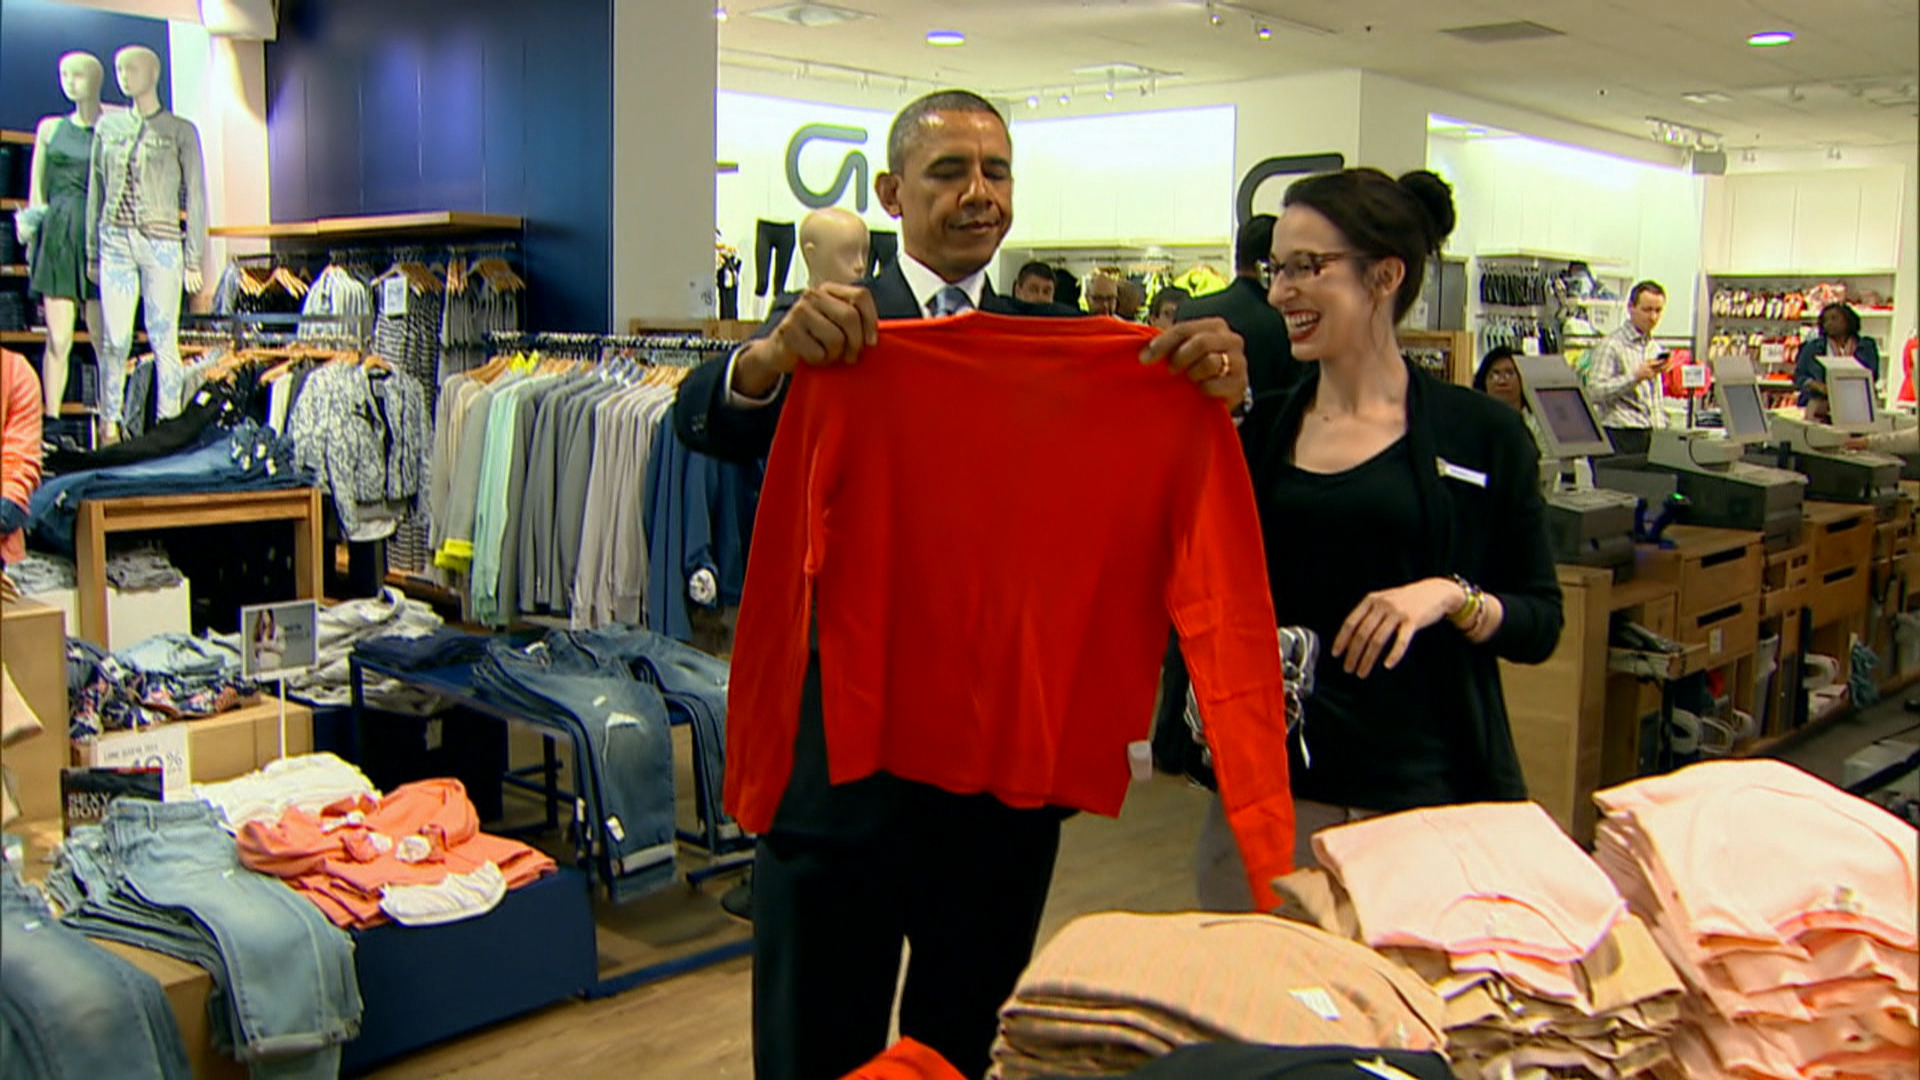 Mind the Gap! Obama Shops for Daughters, Wife